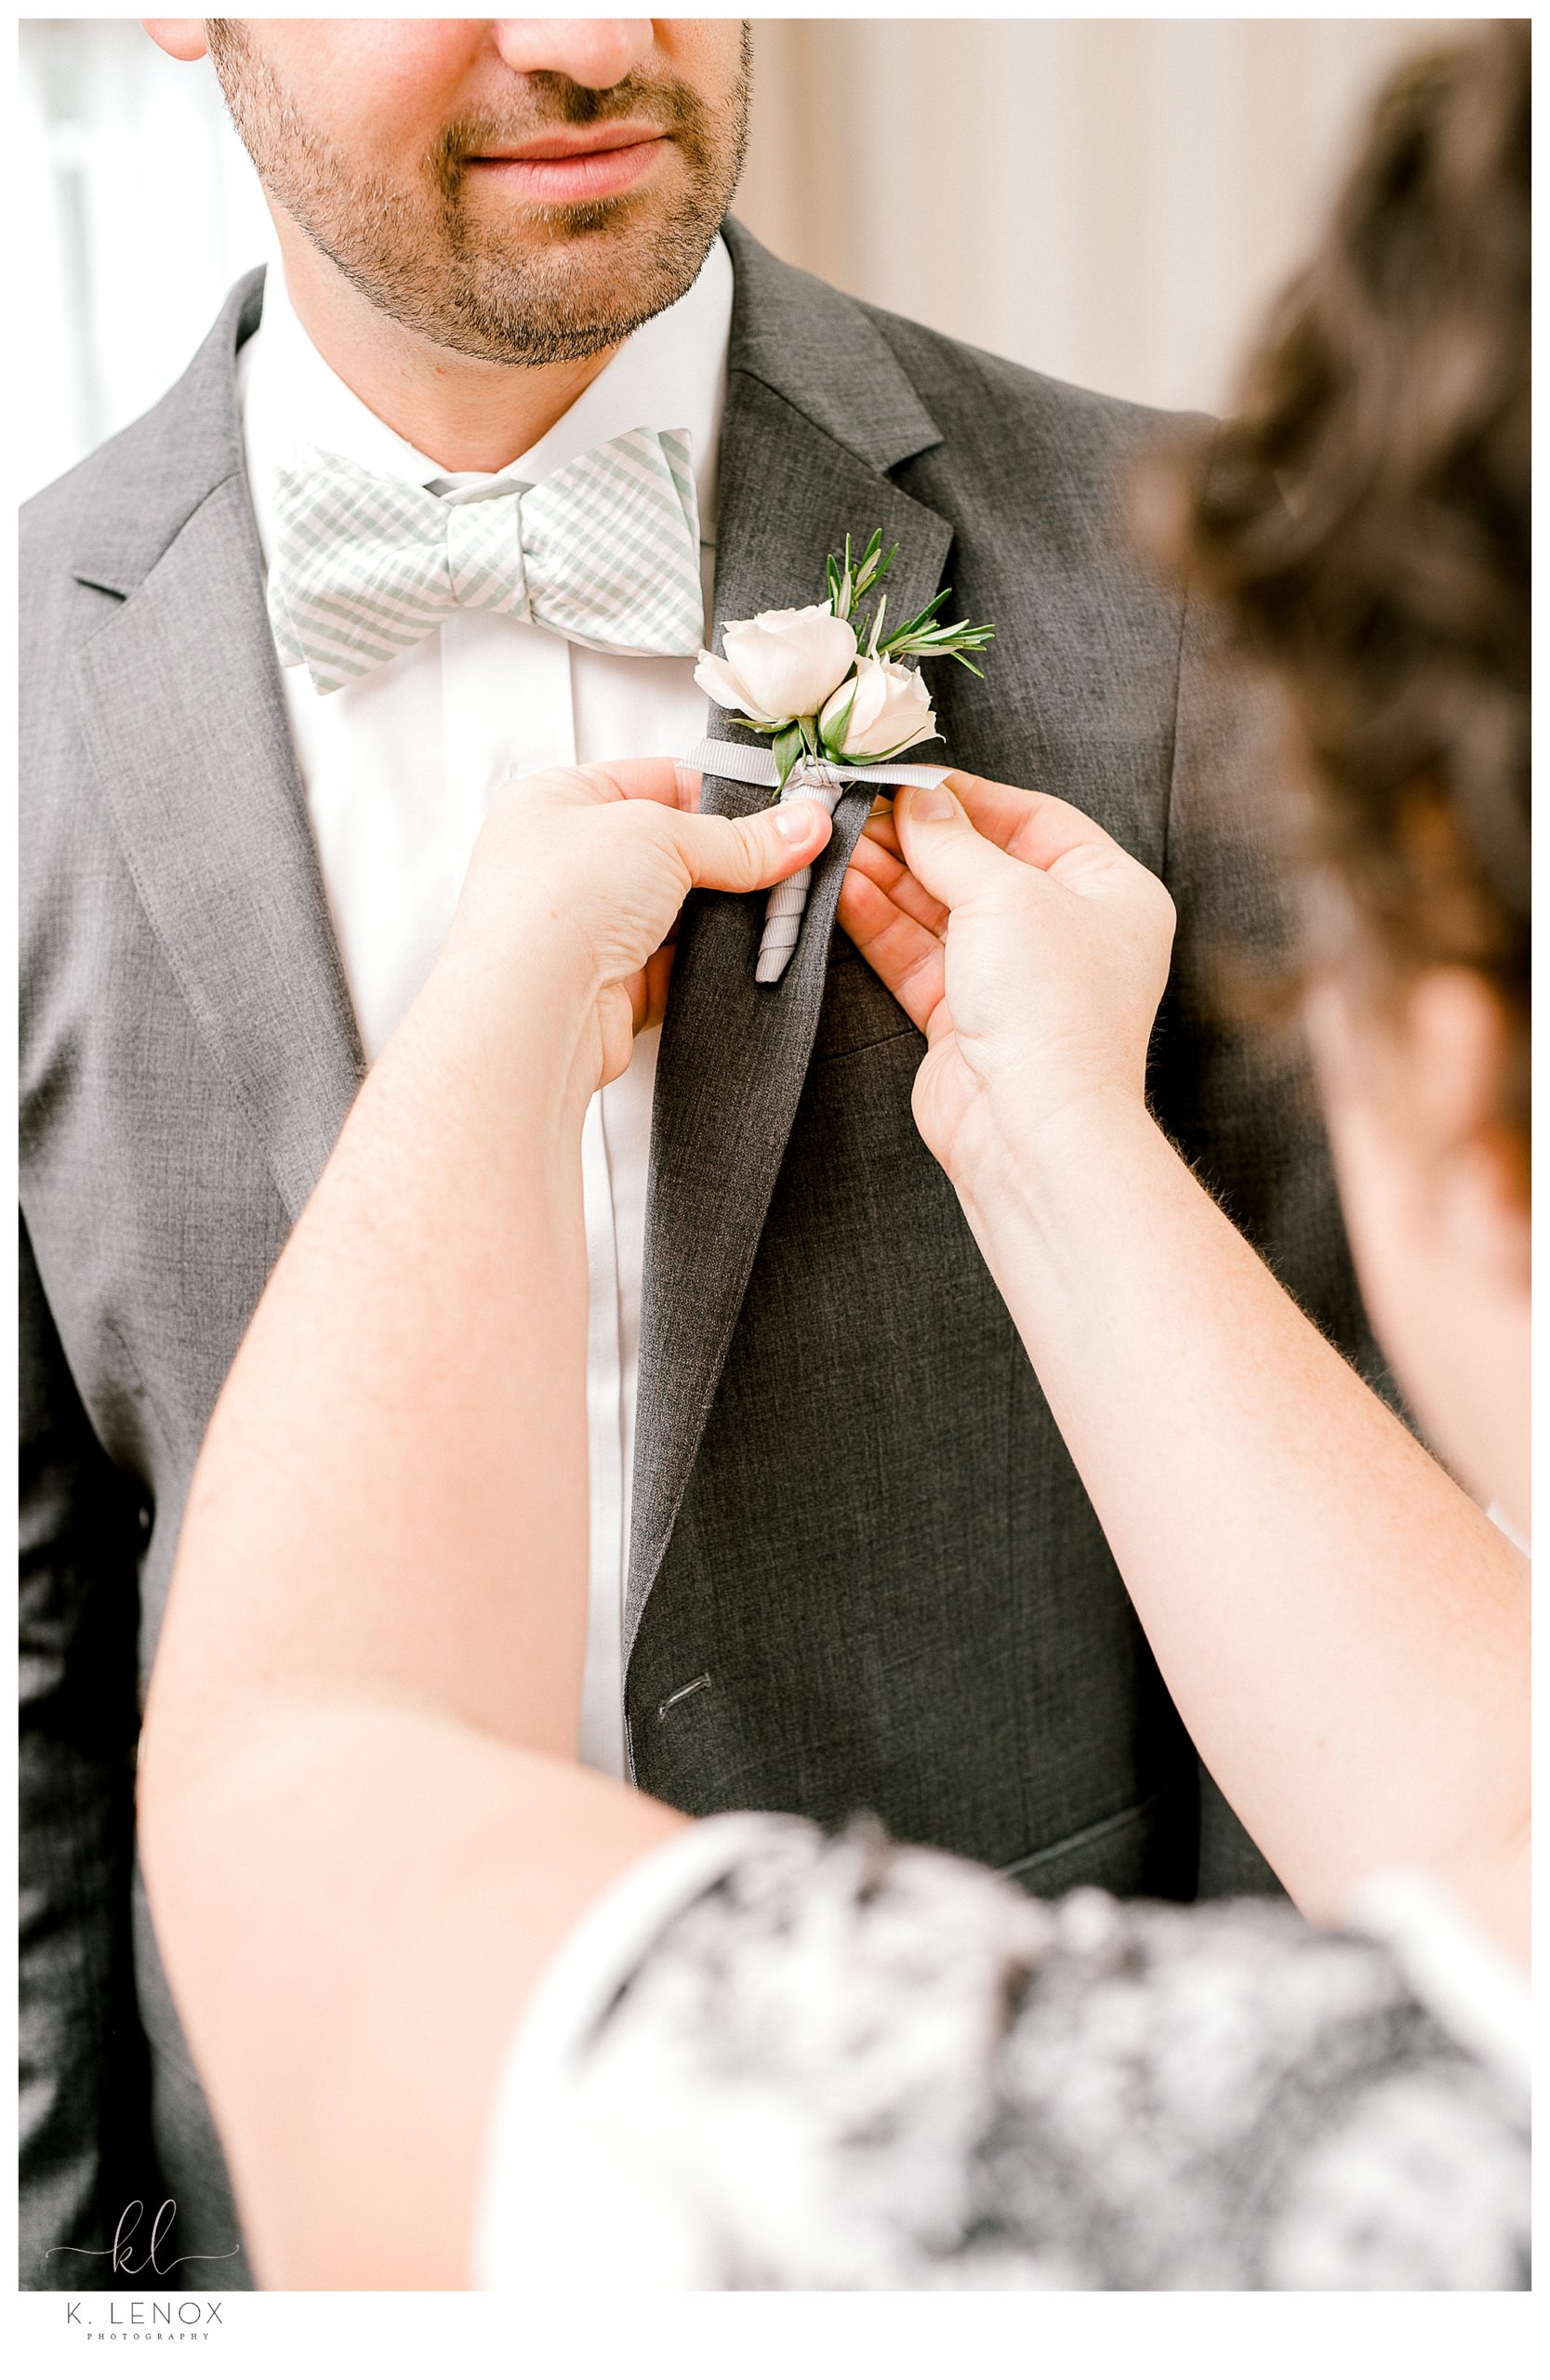 Groom gets his boutonnière put on. 